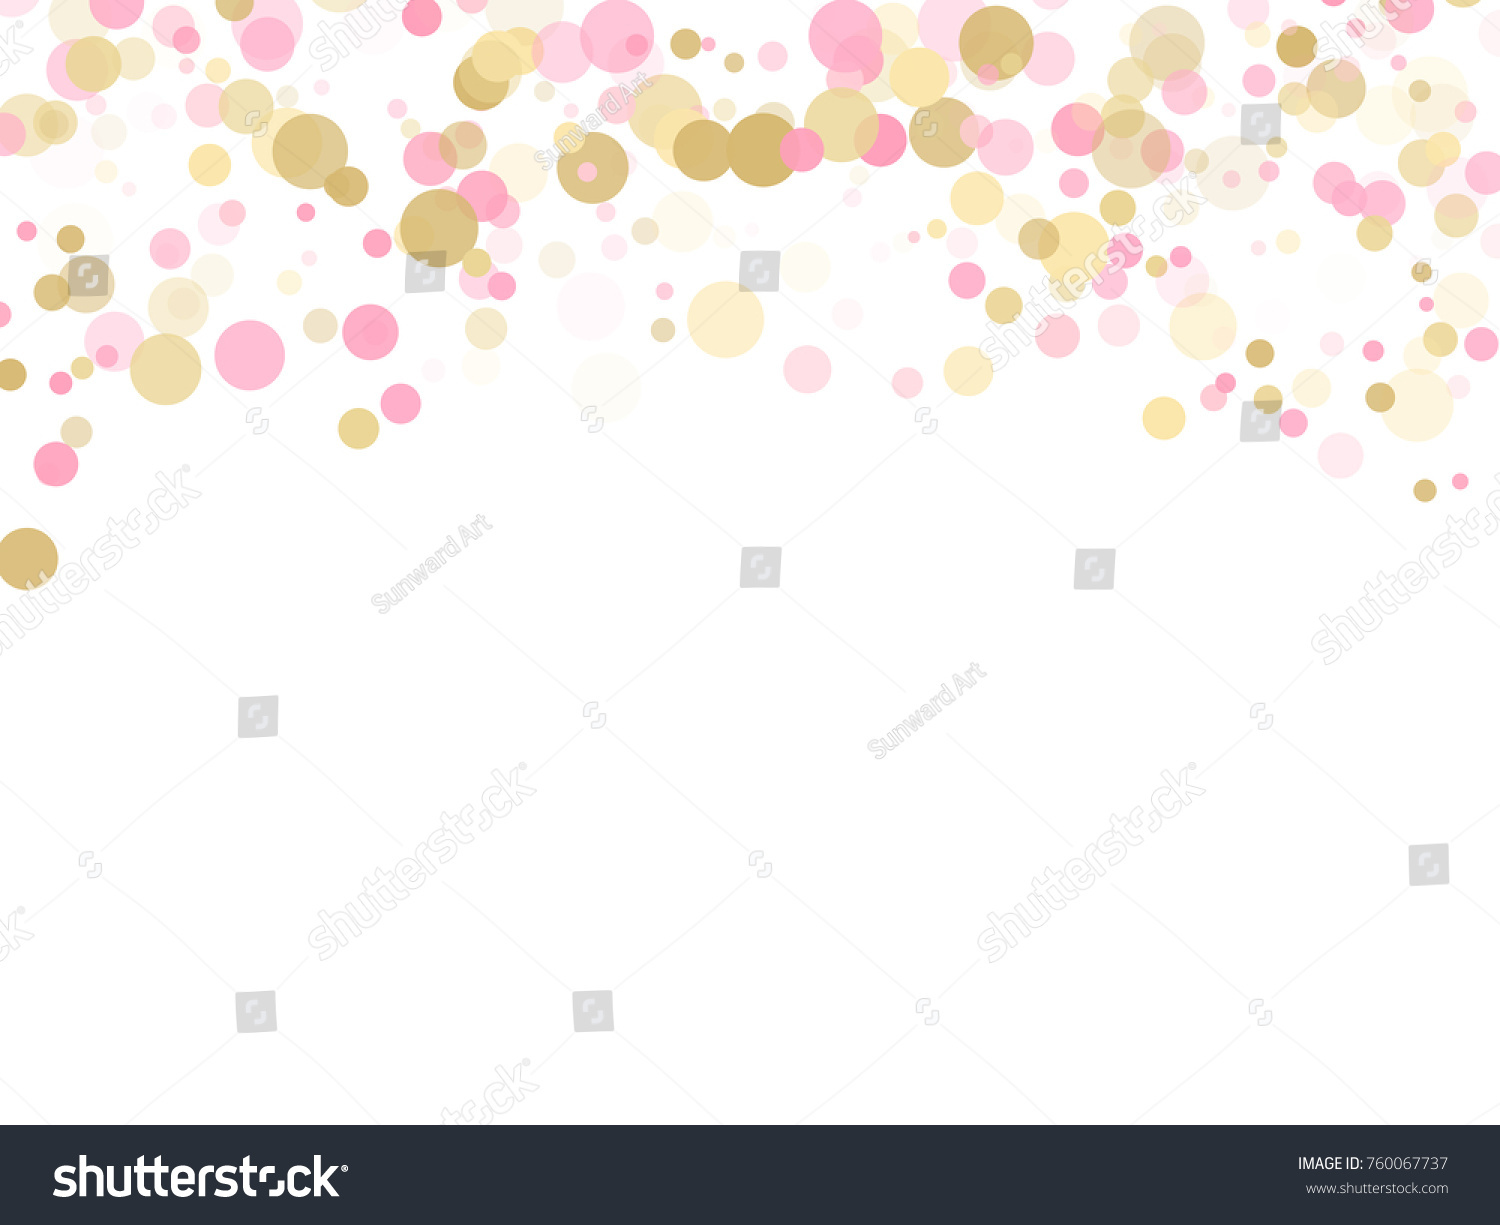 stock vector rose gold confetti circle decoration for christmas card background holiday vector illustration 760067737